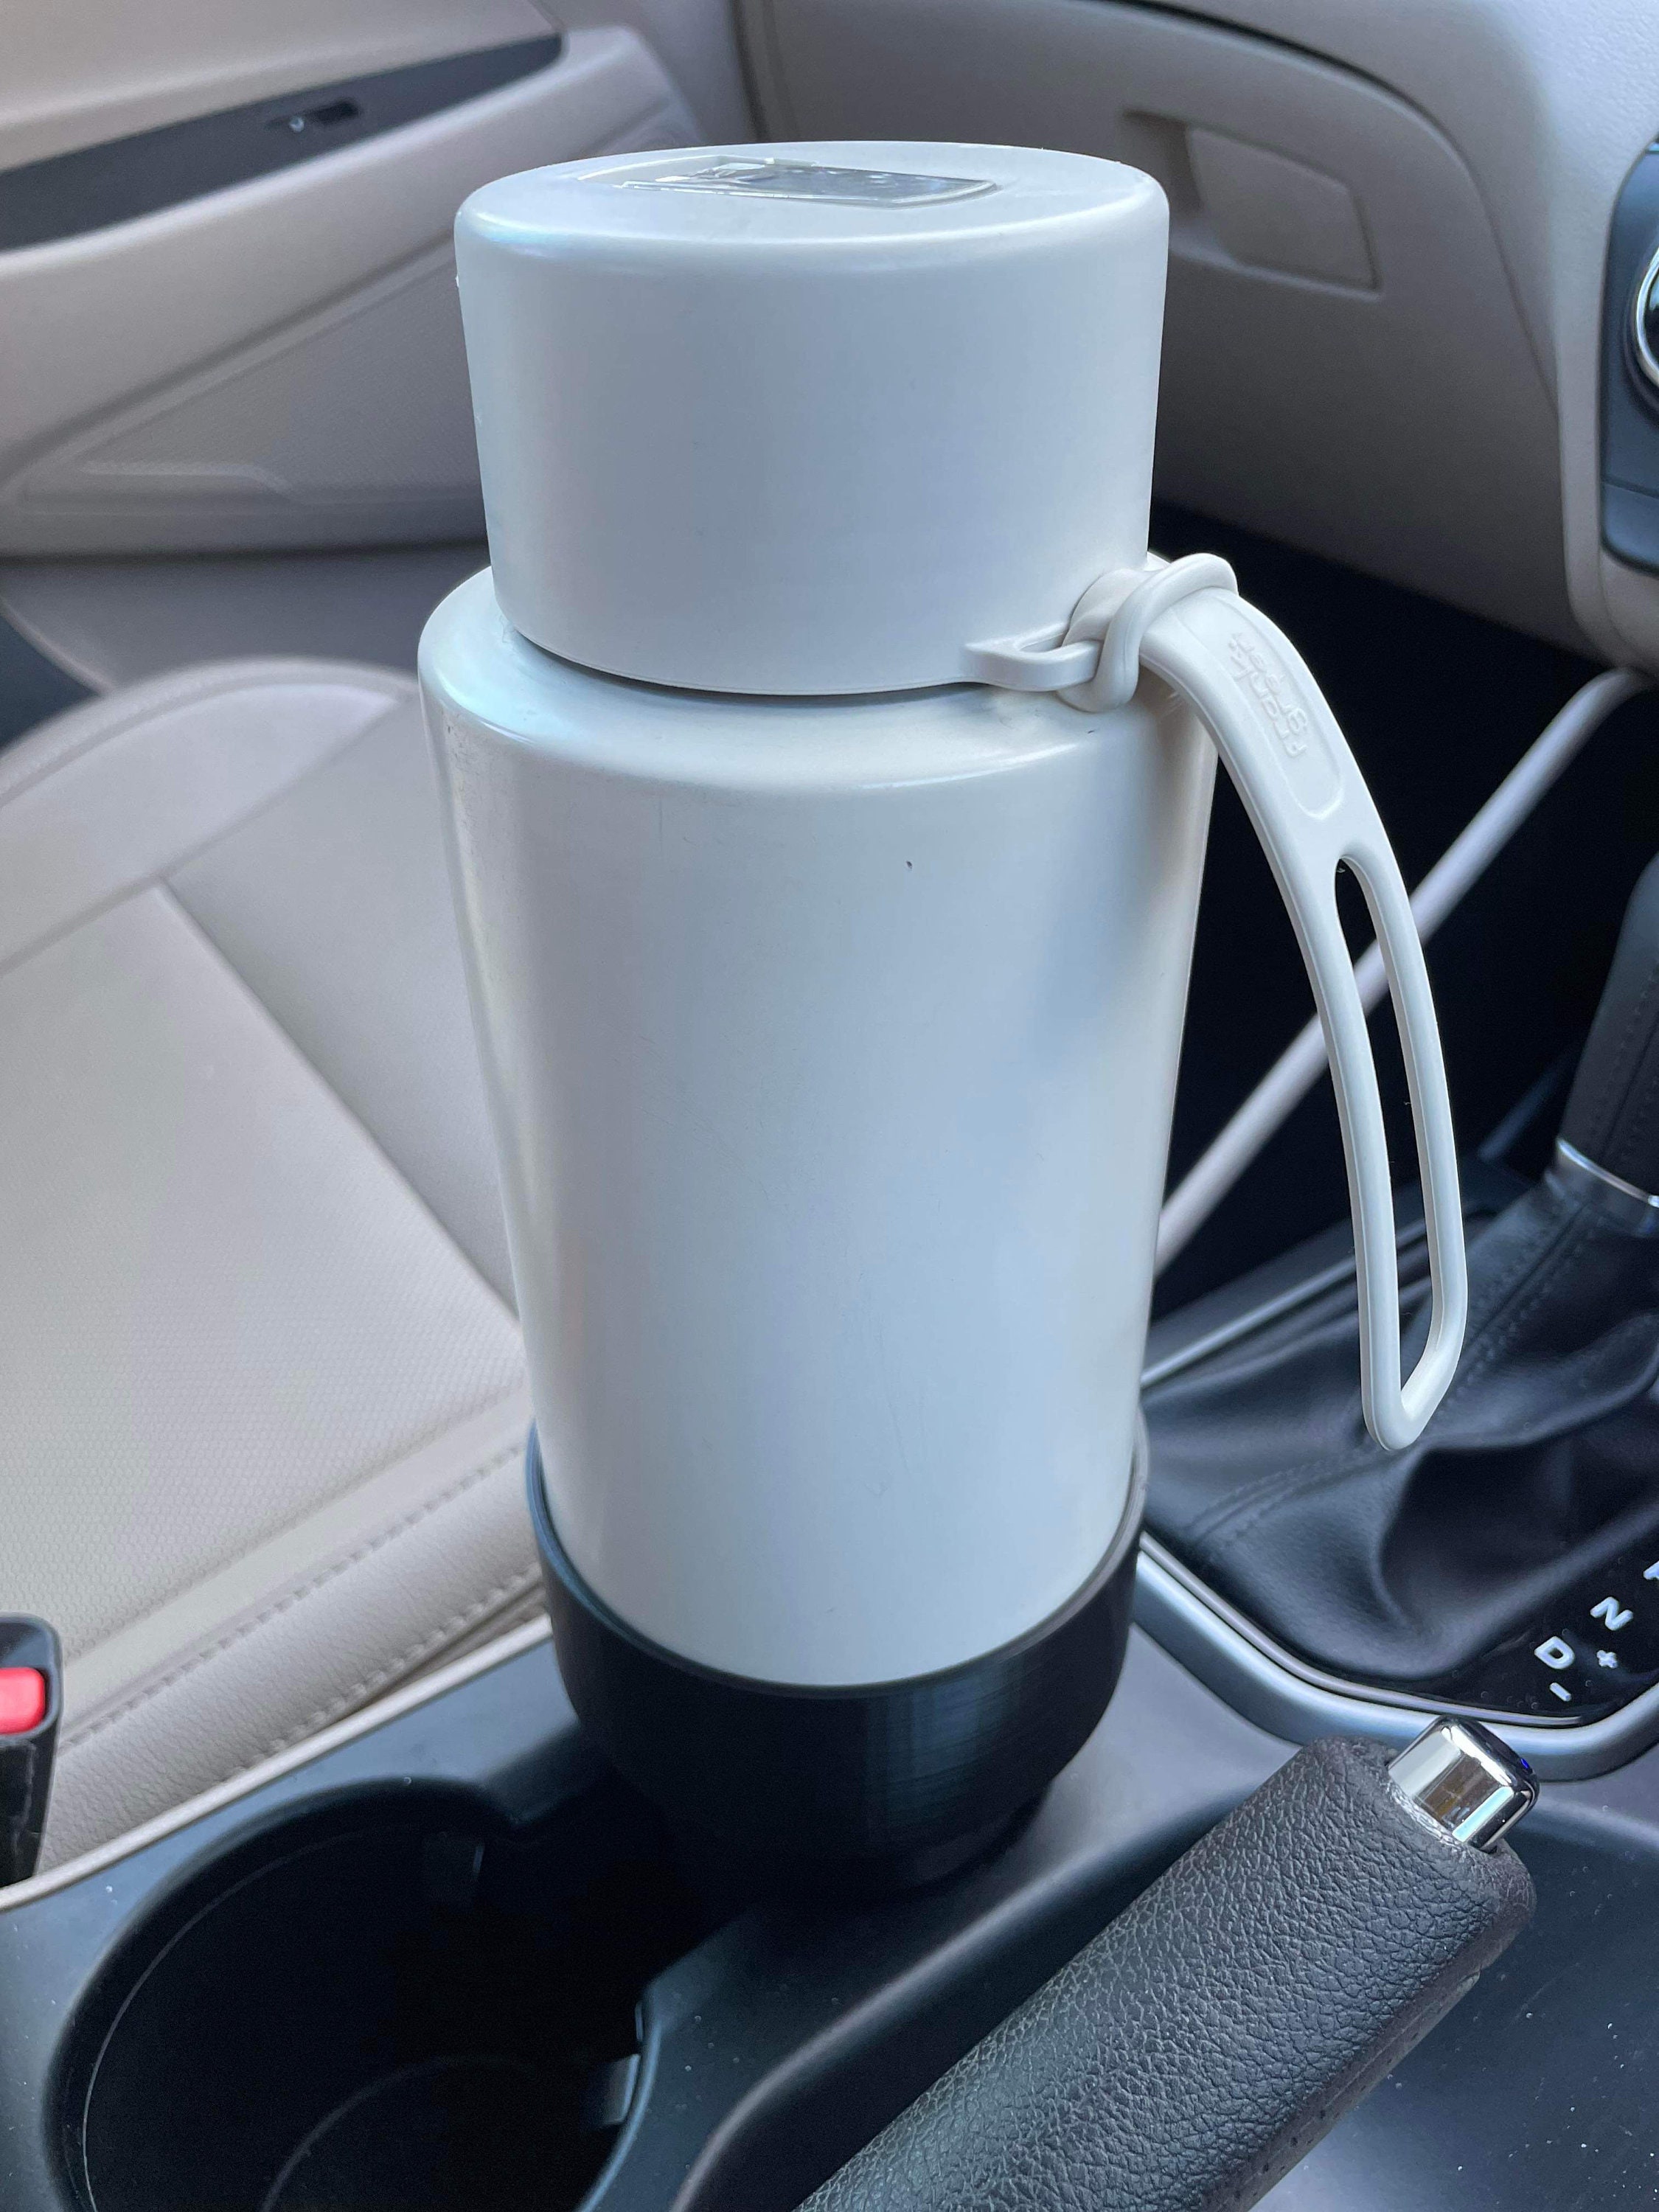 Swigzy Cup Holder Expander (pic of it in a Maverick